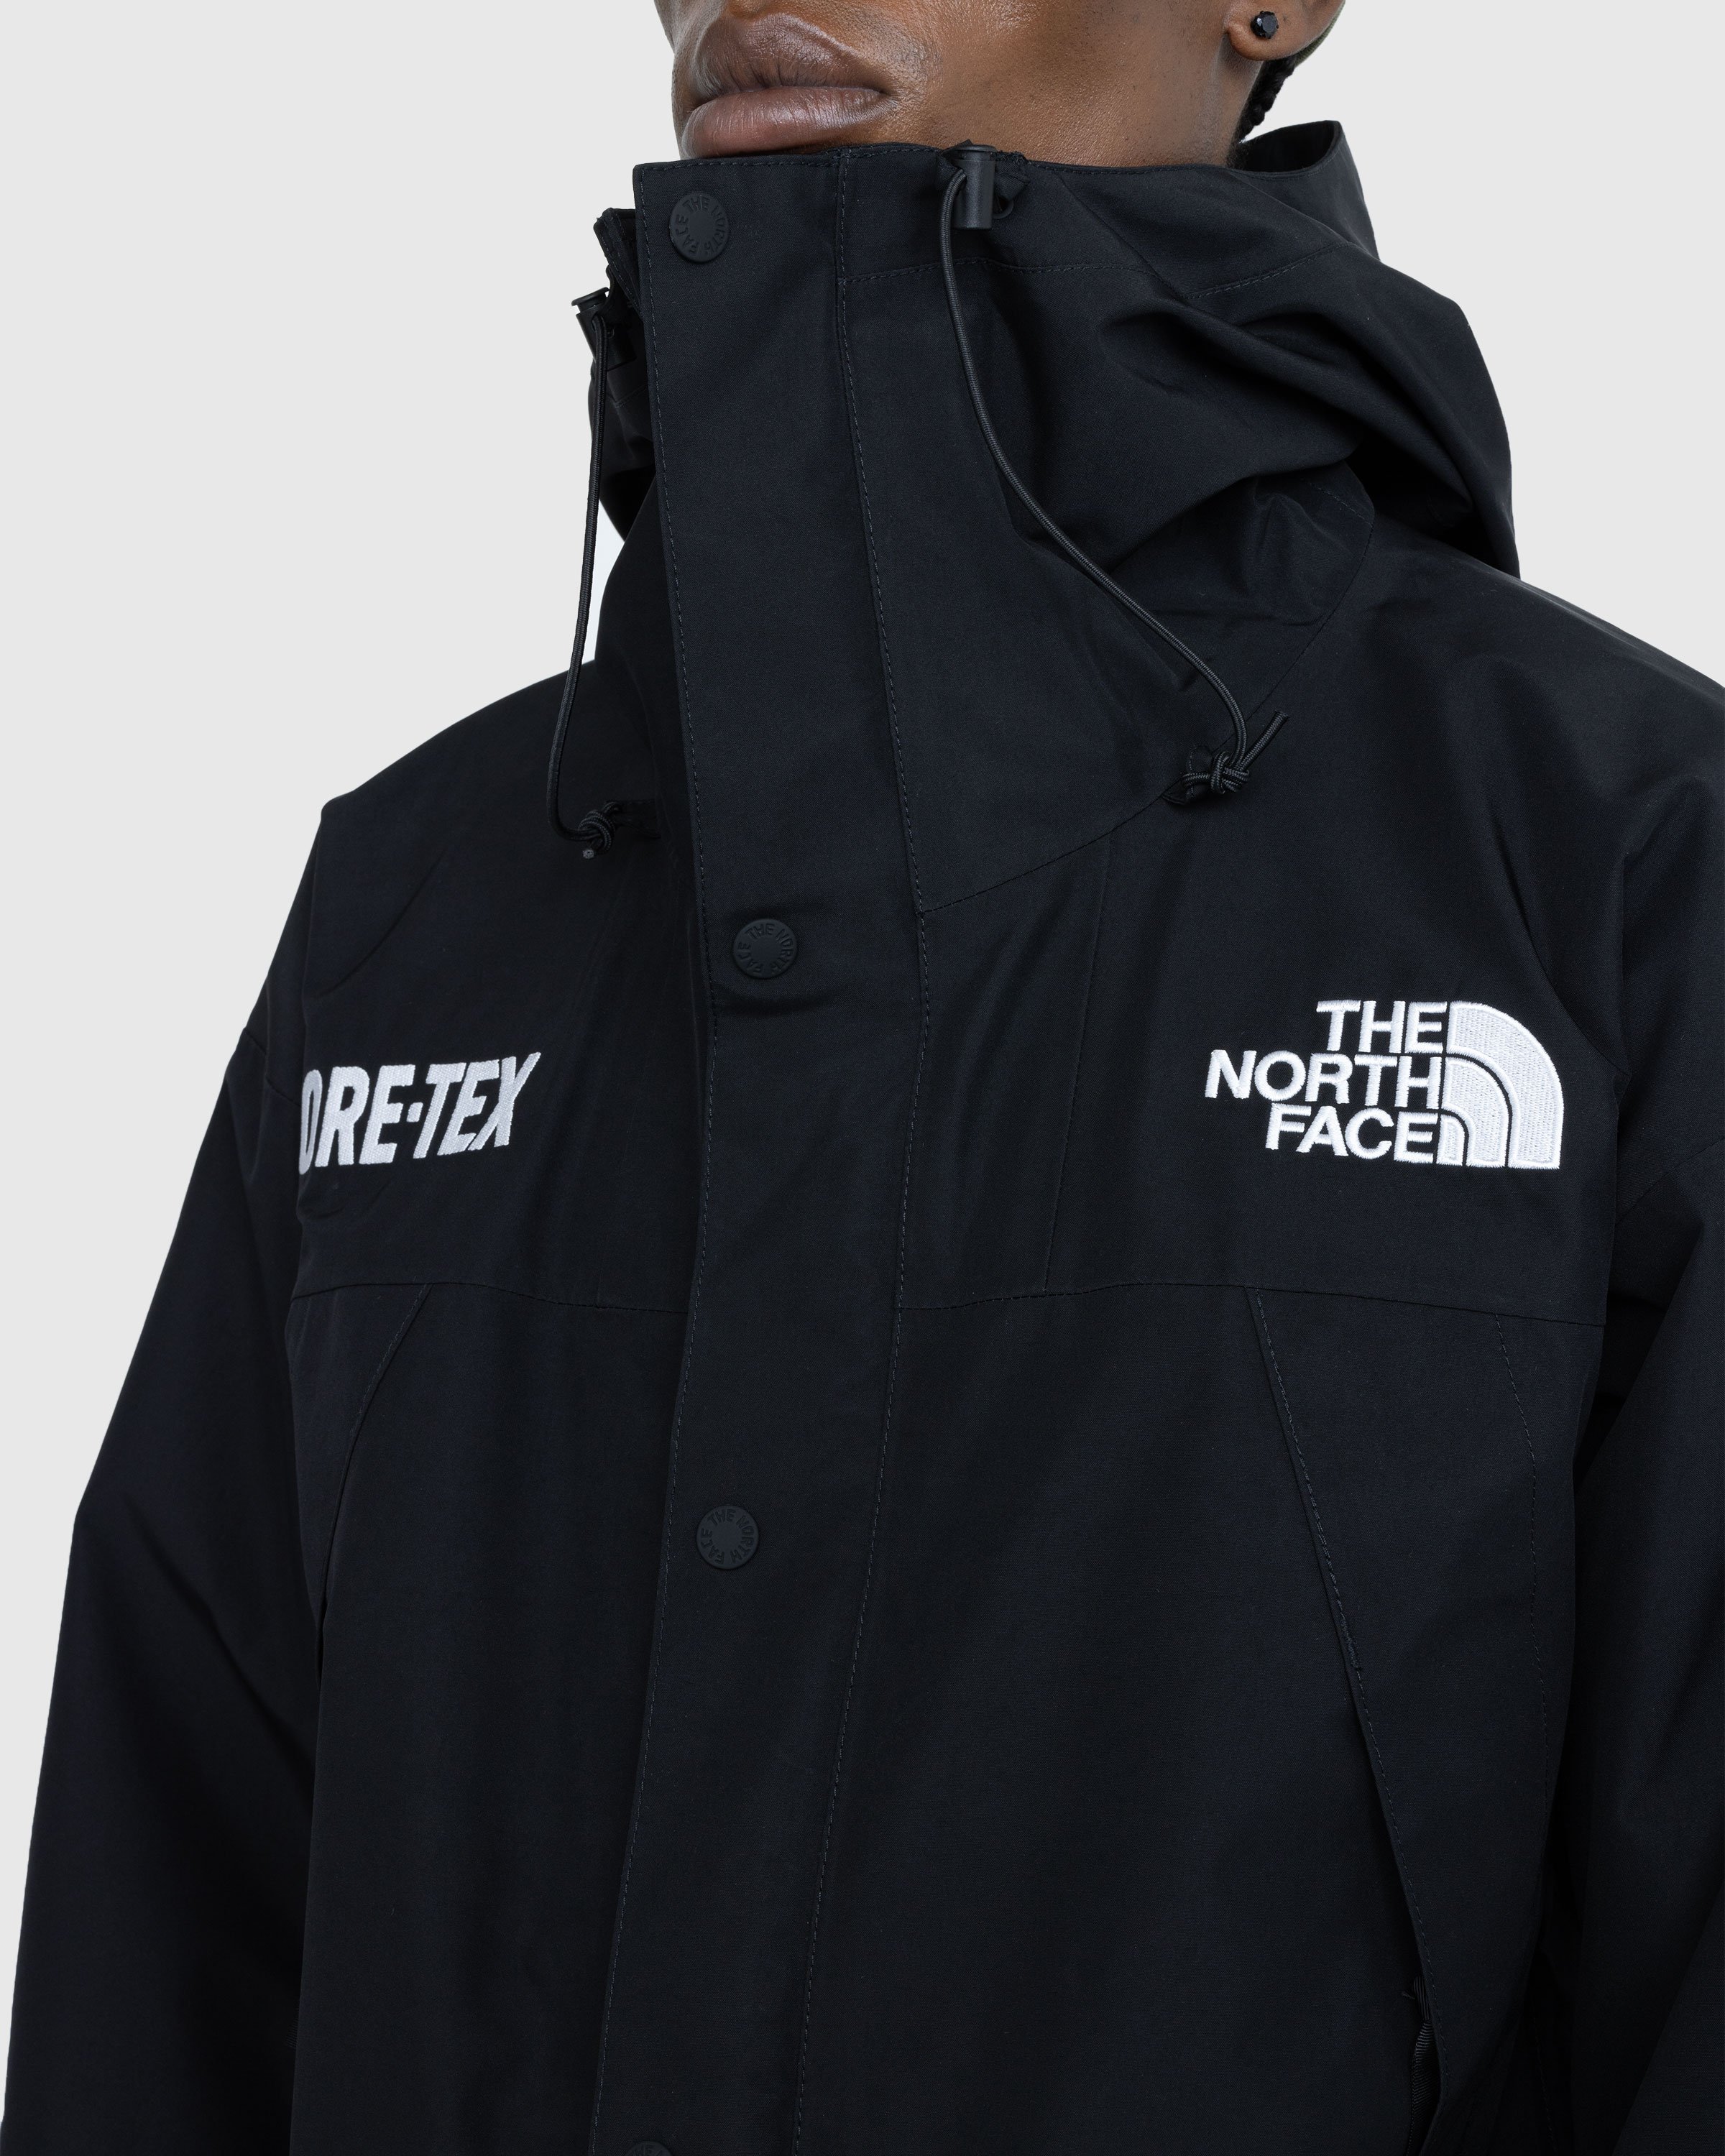 The North Face - Gore-Tex Mountain Jacket Black - Clothing - Black - Image 5